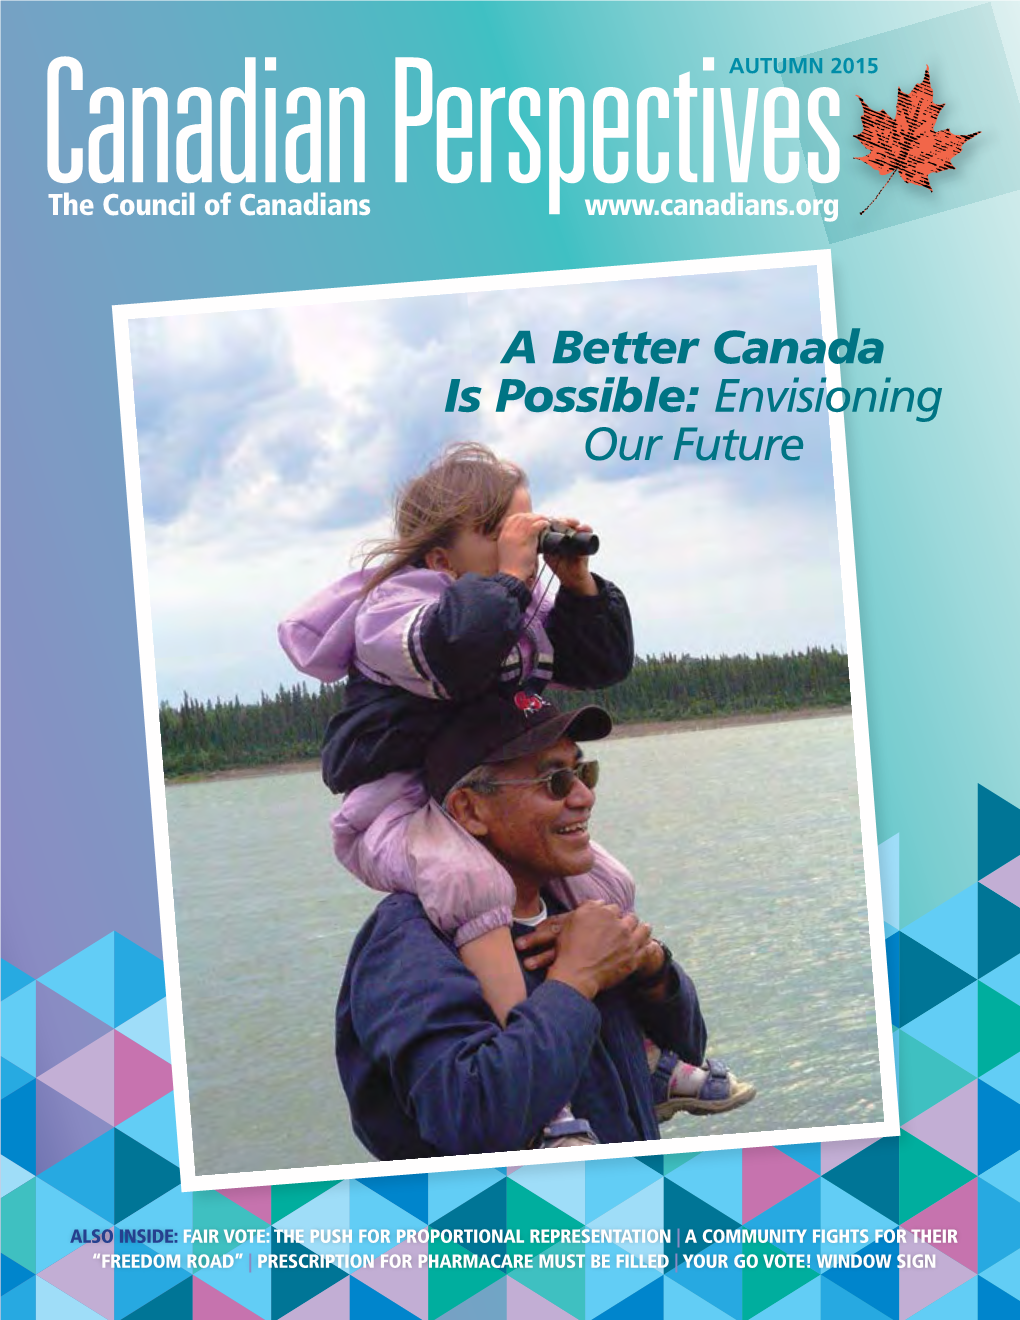 Canadian Perspectives Are Available At